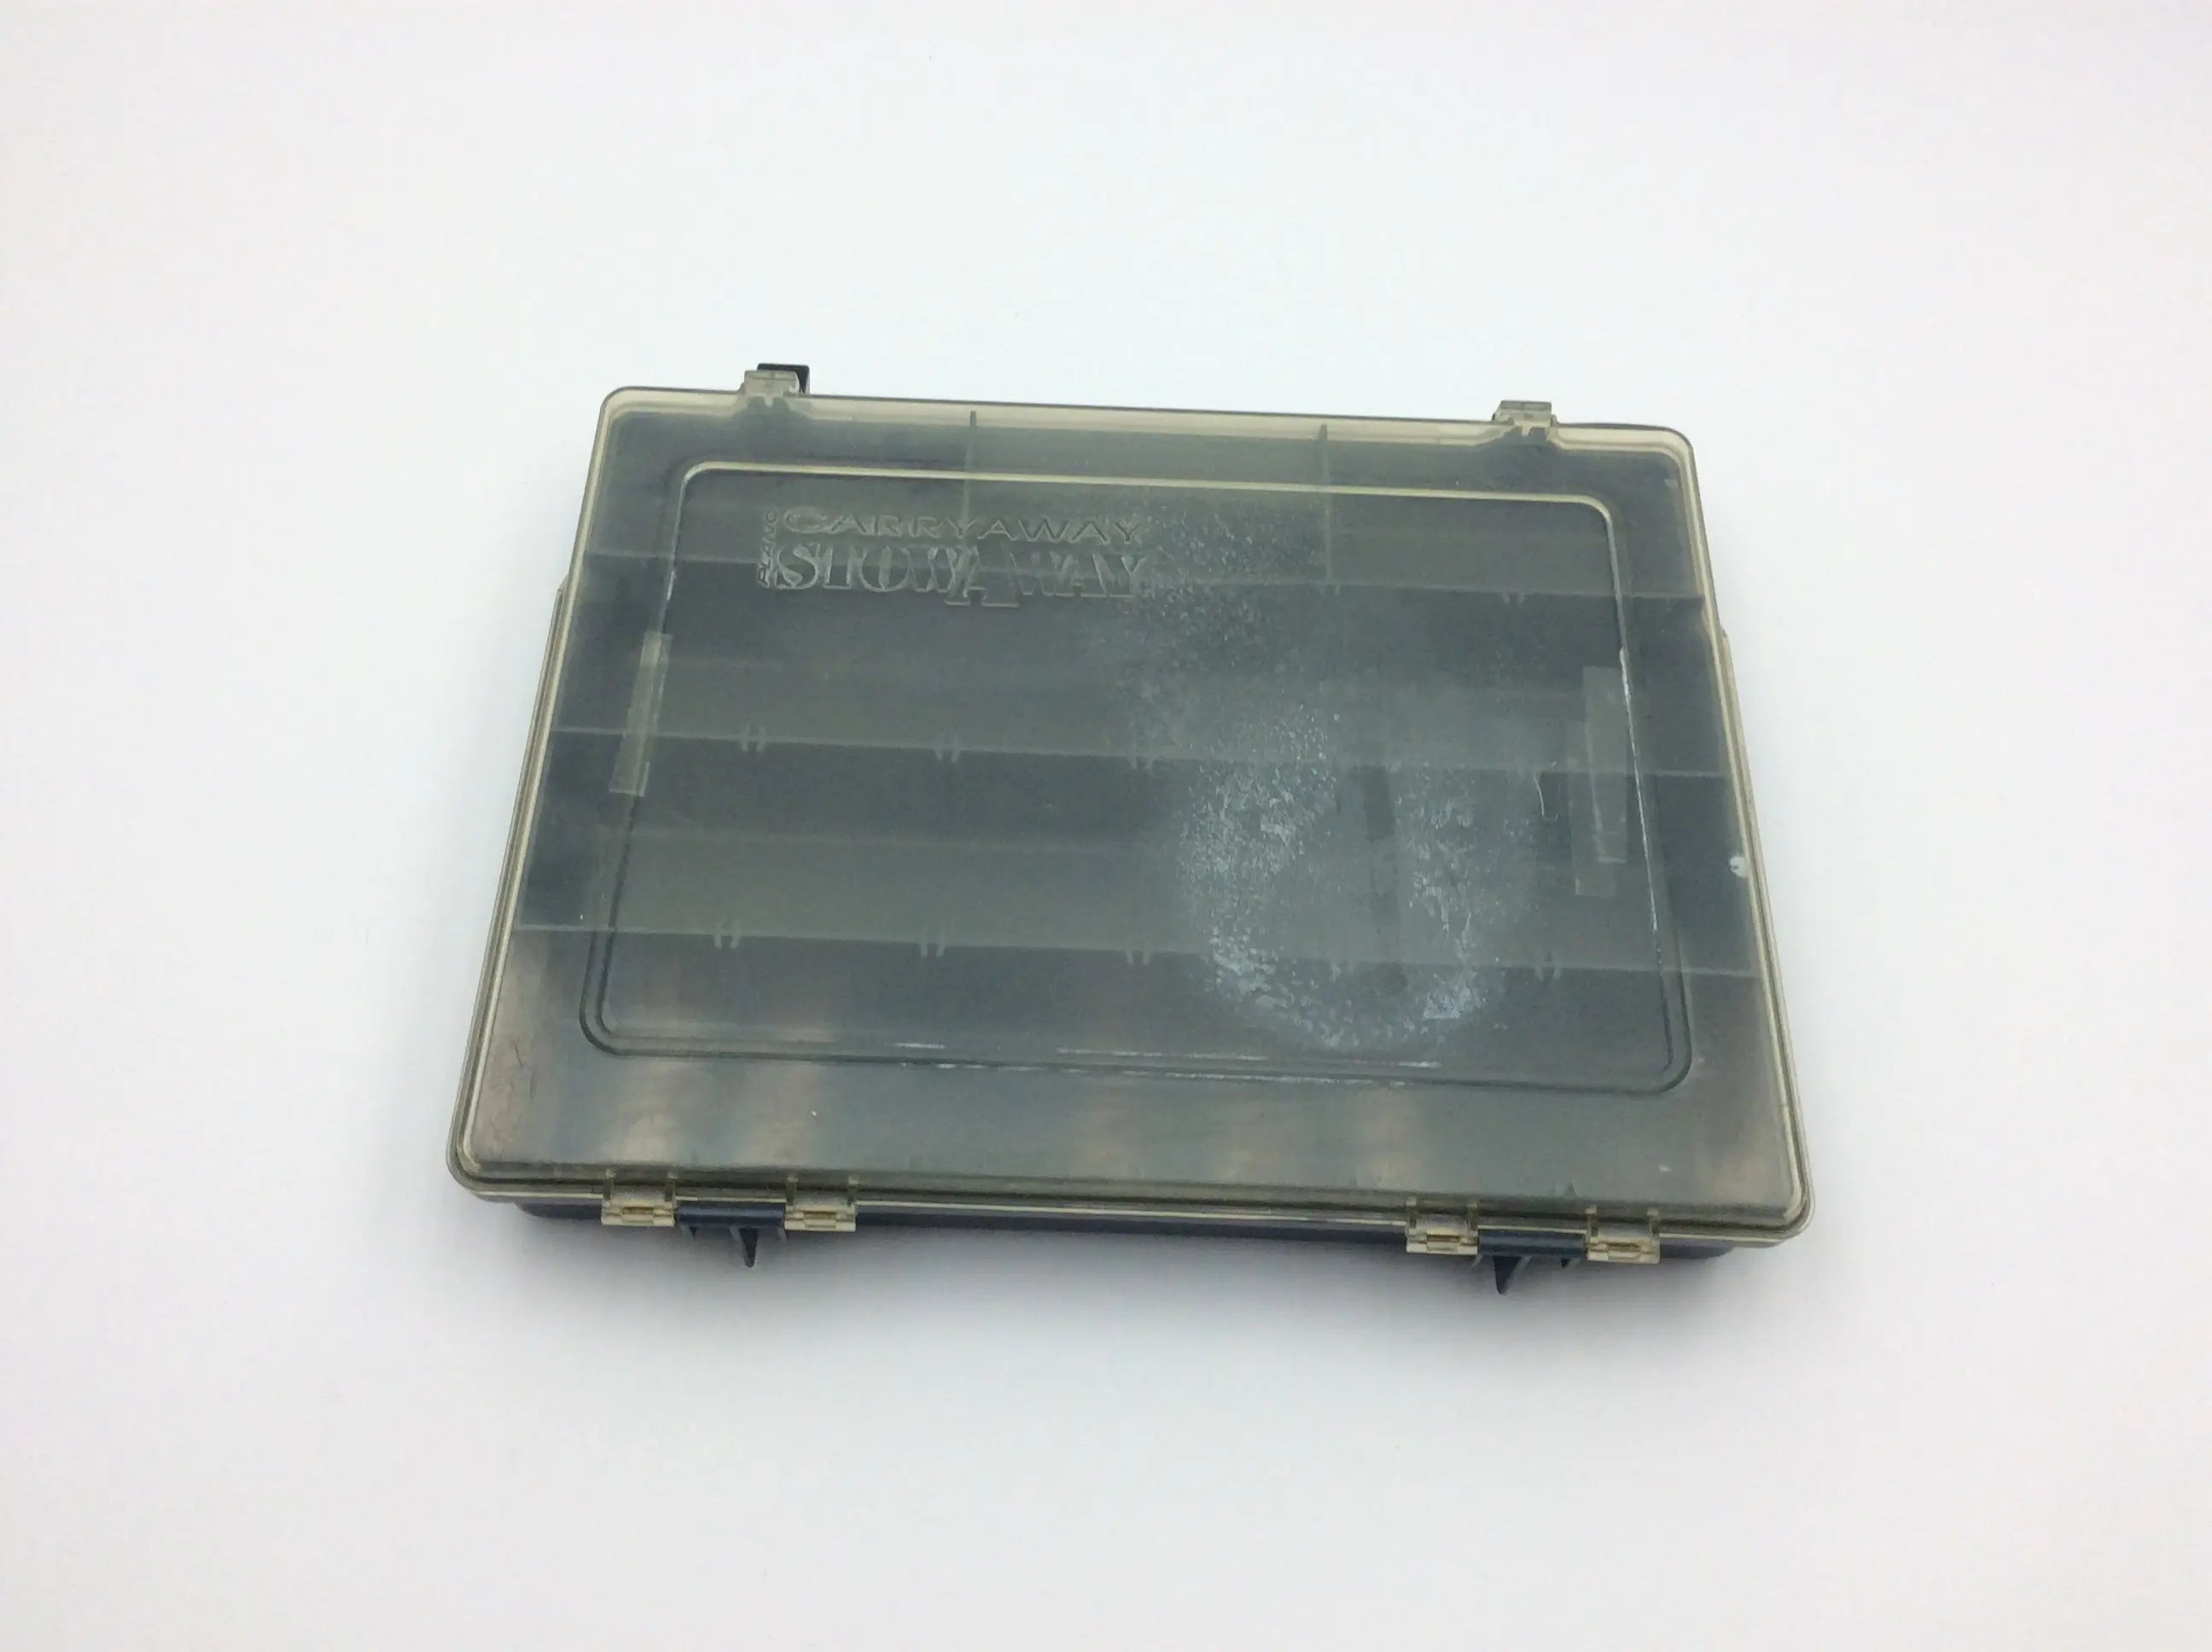 Plano Carry Away Stowaway Compartment Box – A Biomedical Service